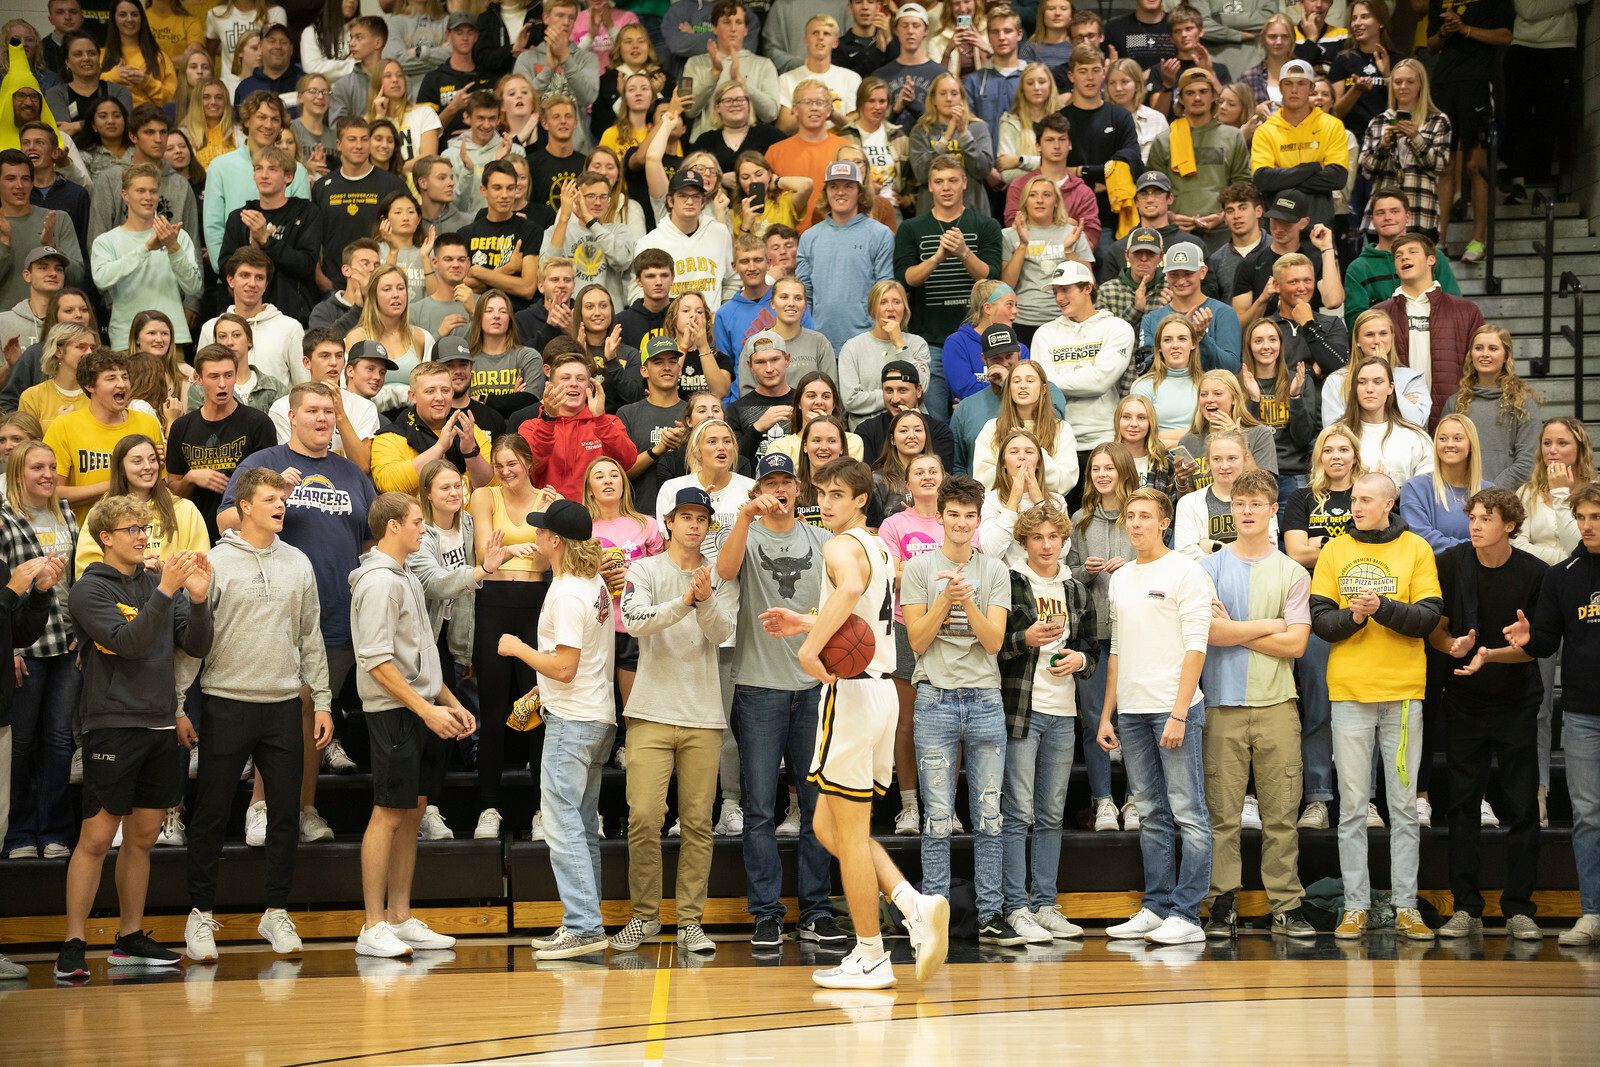 A picture of the crowd taken during a basketball game